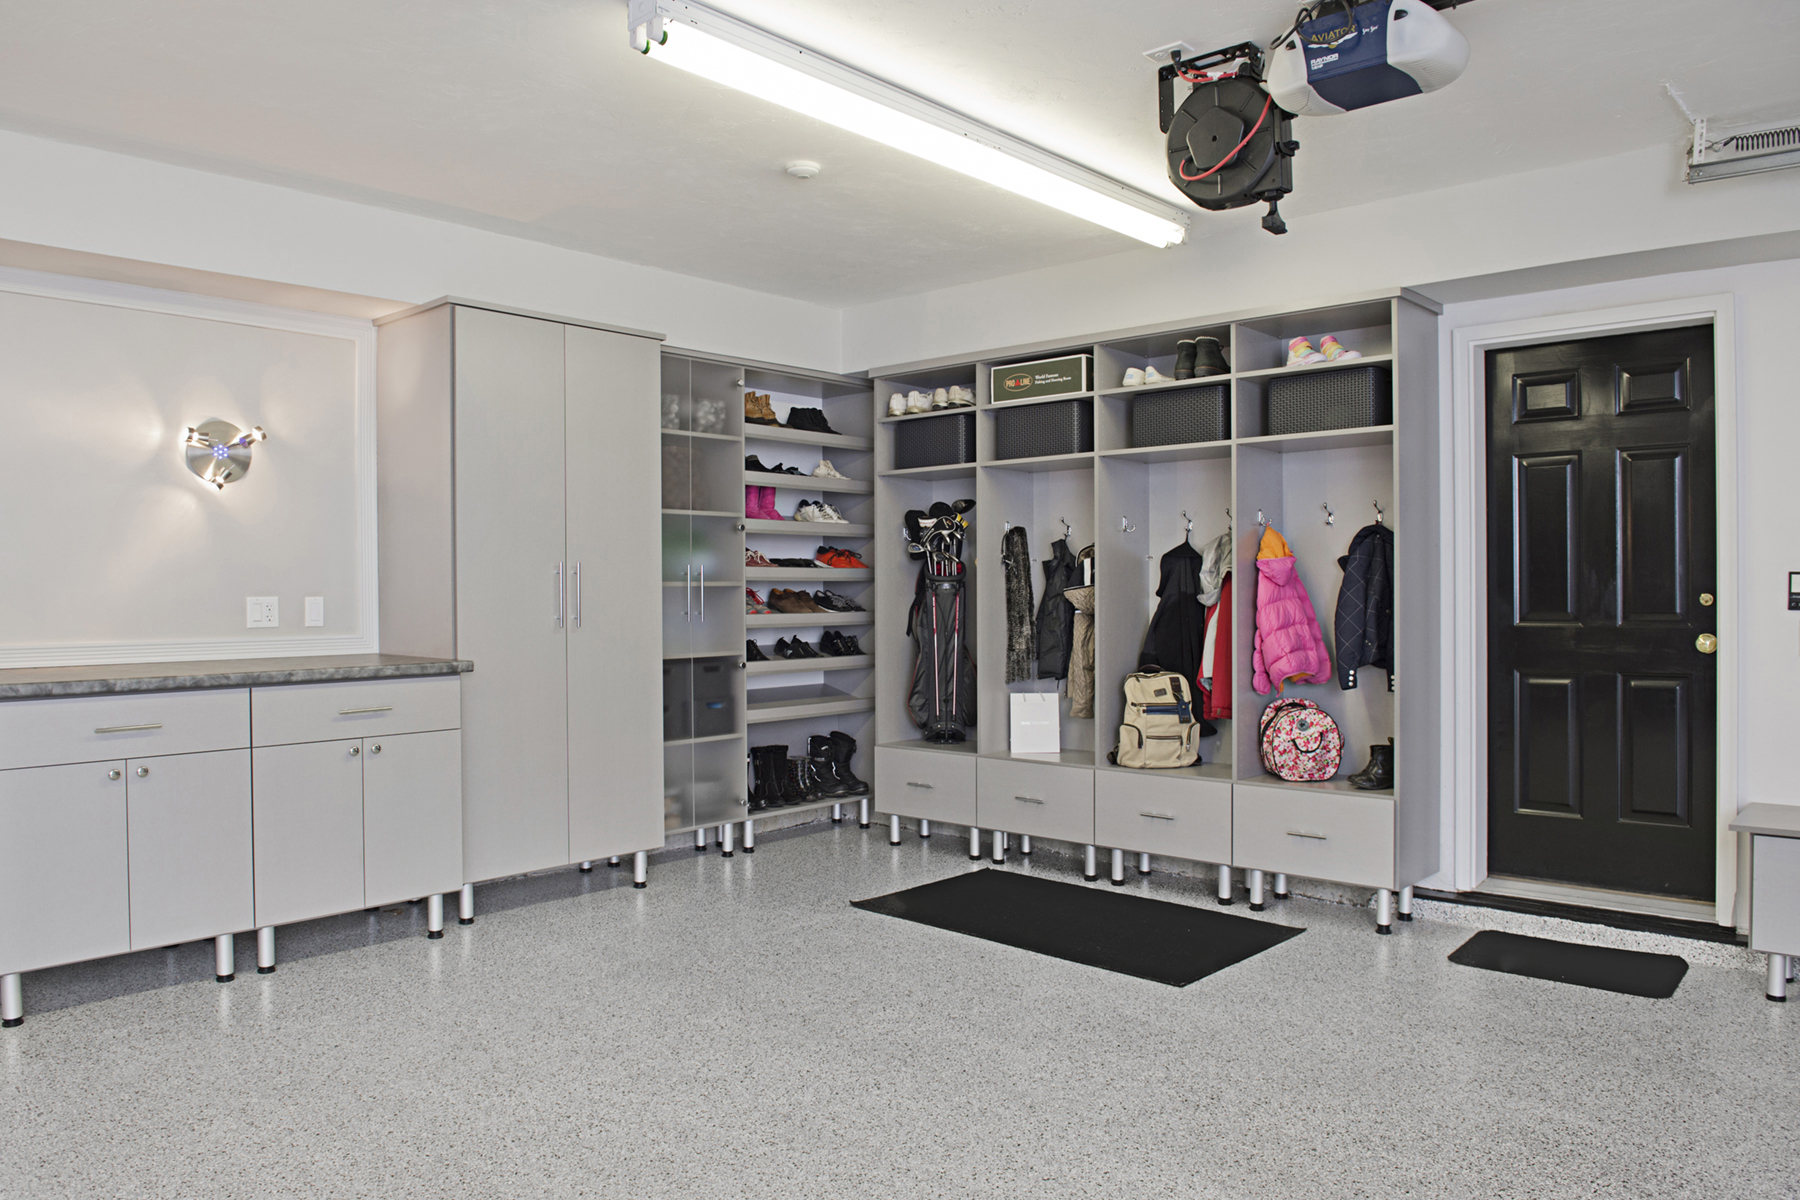 8 Steps to Help You Plan Your Garage Remodeling